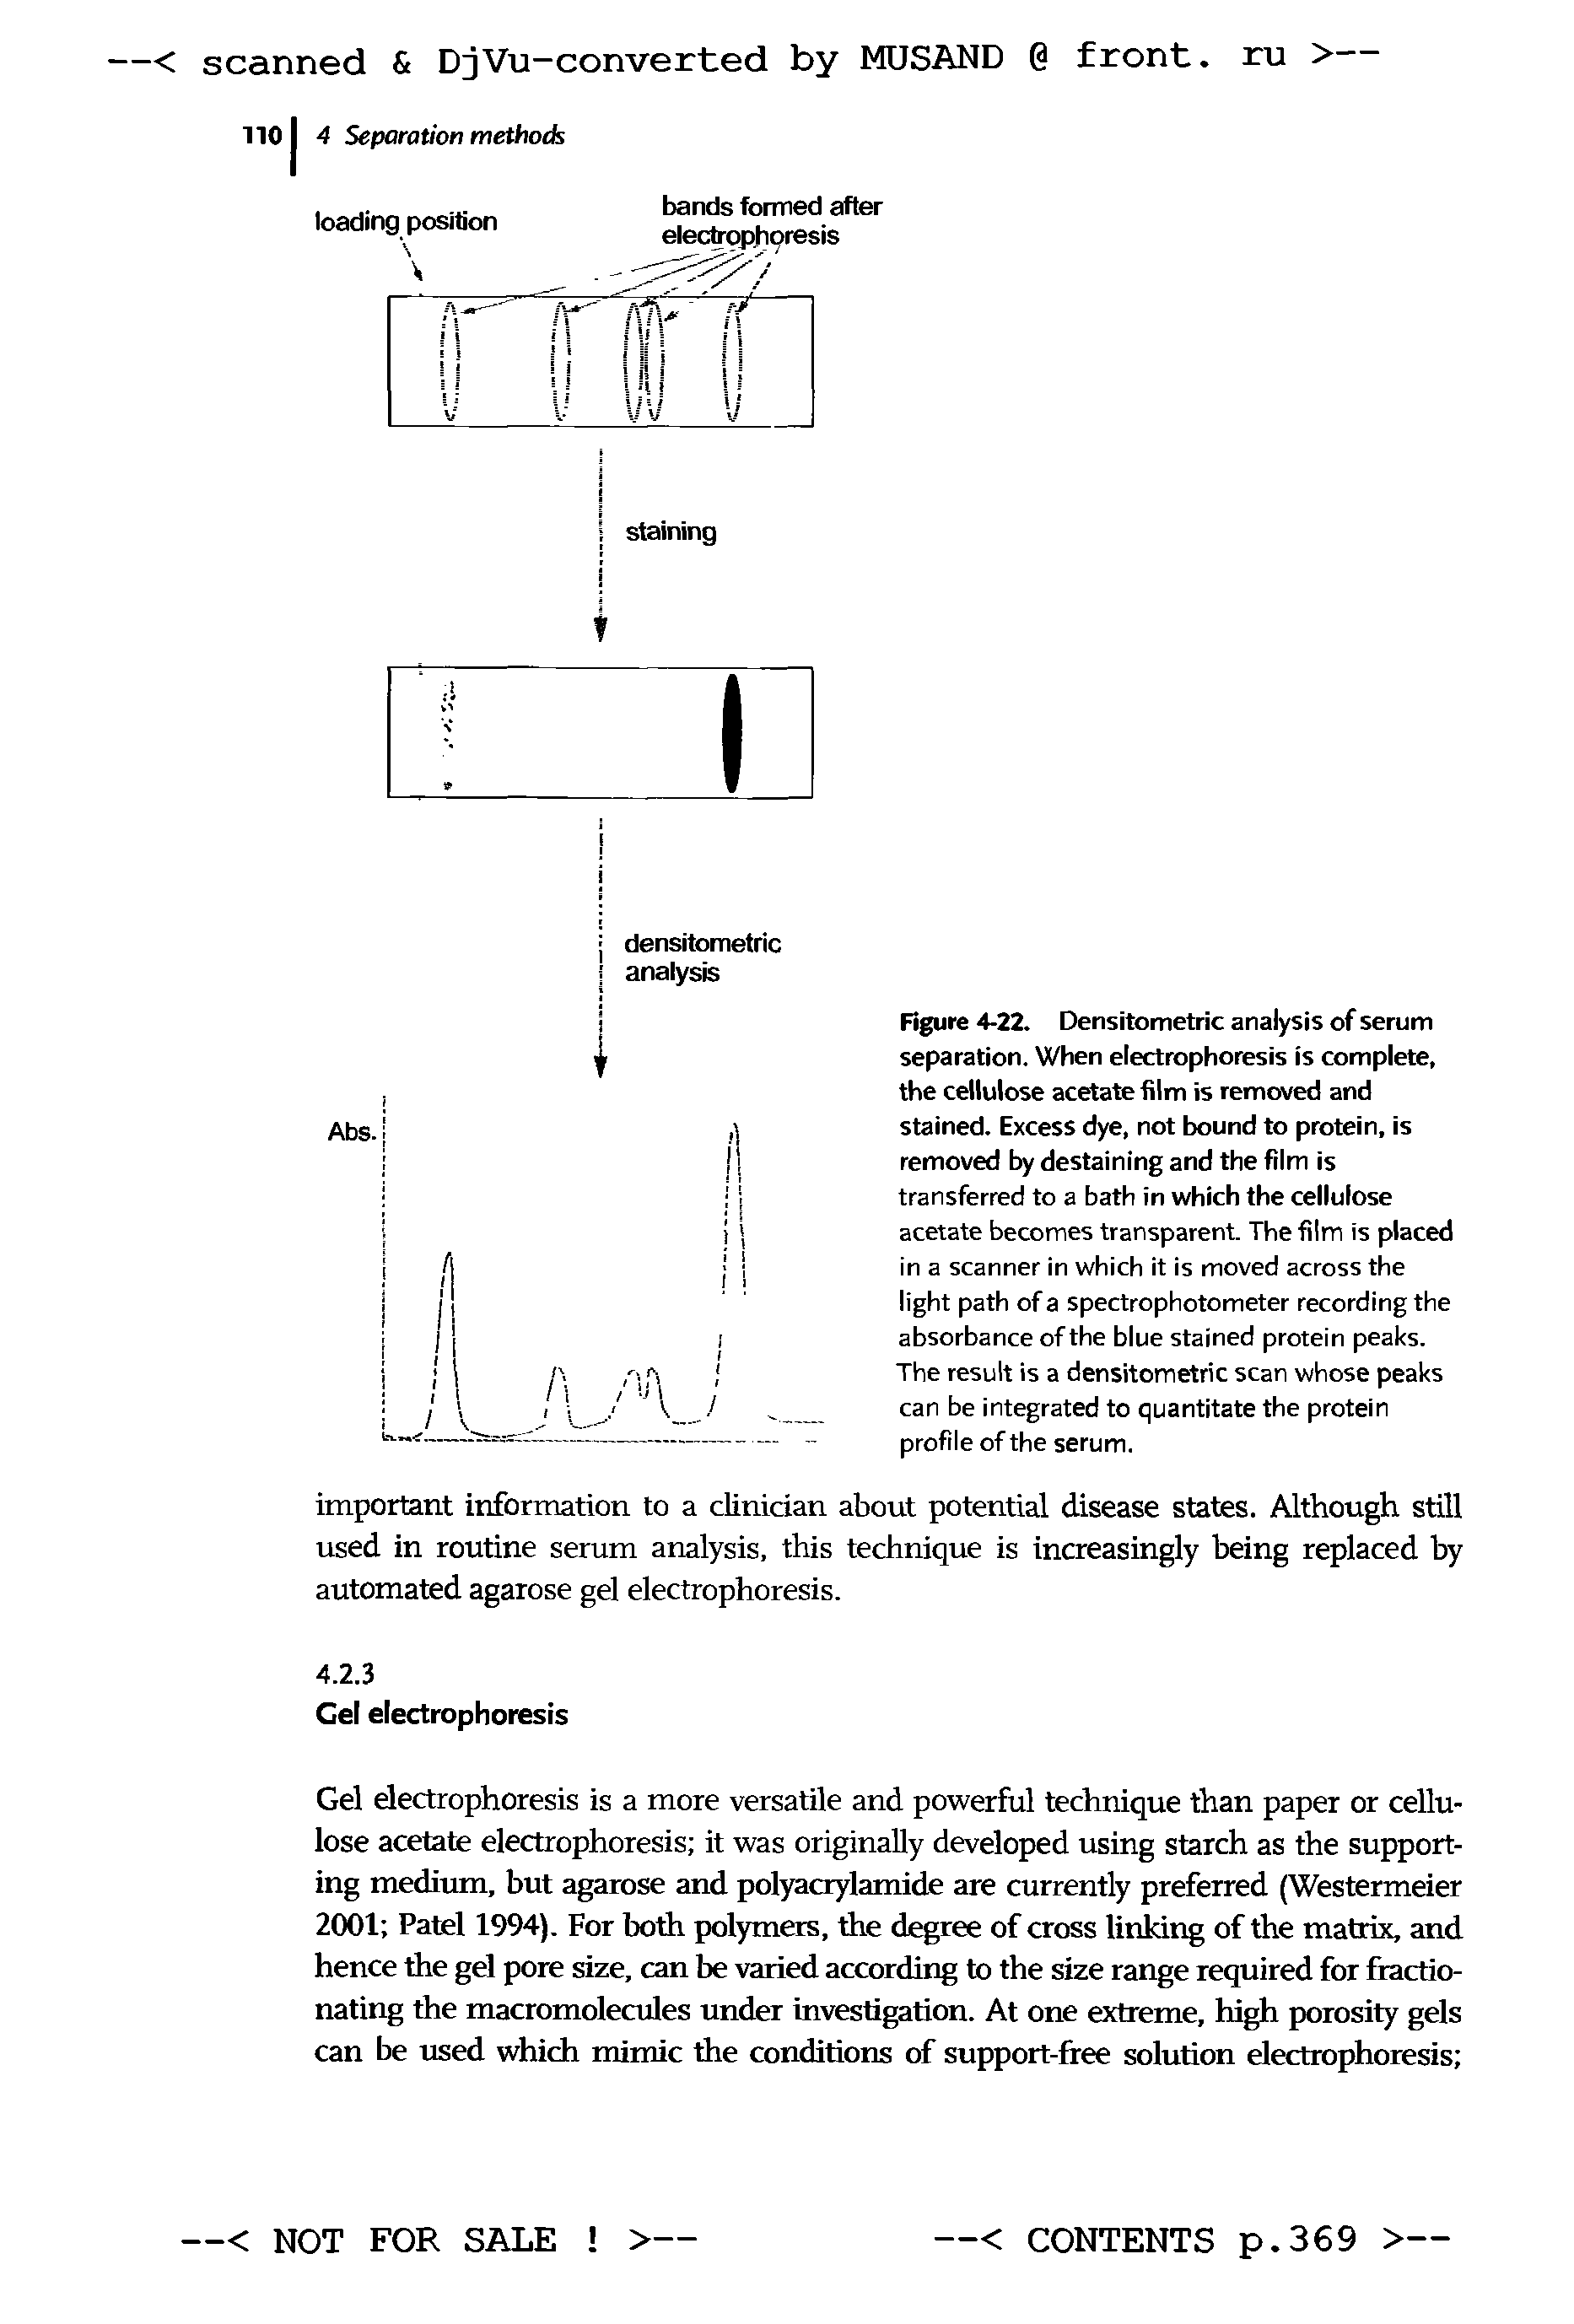 Figure 4-22. Densitometric analysis of serum separation. When electrophoresis is complete, the cellulose acetate film is removed and stained. Excess dye, not bound to protein, is removed by destaining and the film is transferred to a bath in which the cellulose acetate becomes transparent. The film is placed in a scanner in which it is moved across the light path of a spectrophotometer recording the absorbance of the blue stained protein peaks. The result is a densitometric scan whose peaks can be integrated to quantitate the protein profile of the serum.